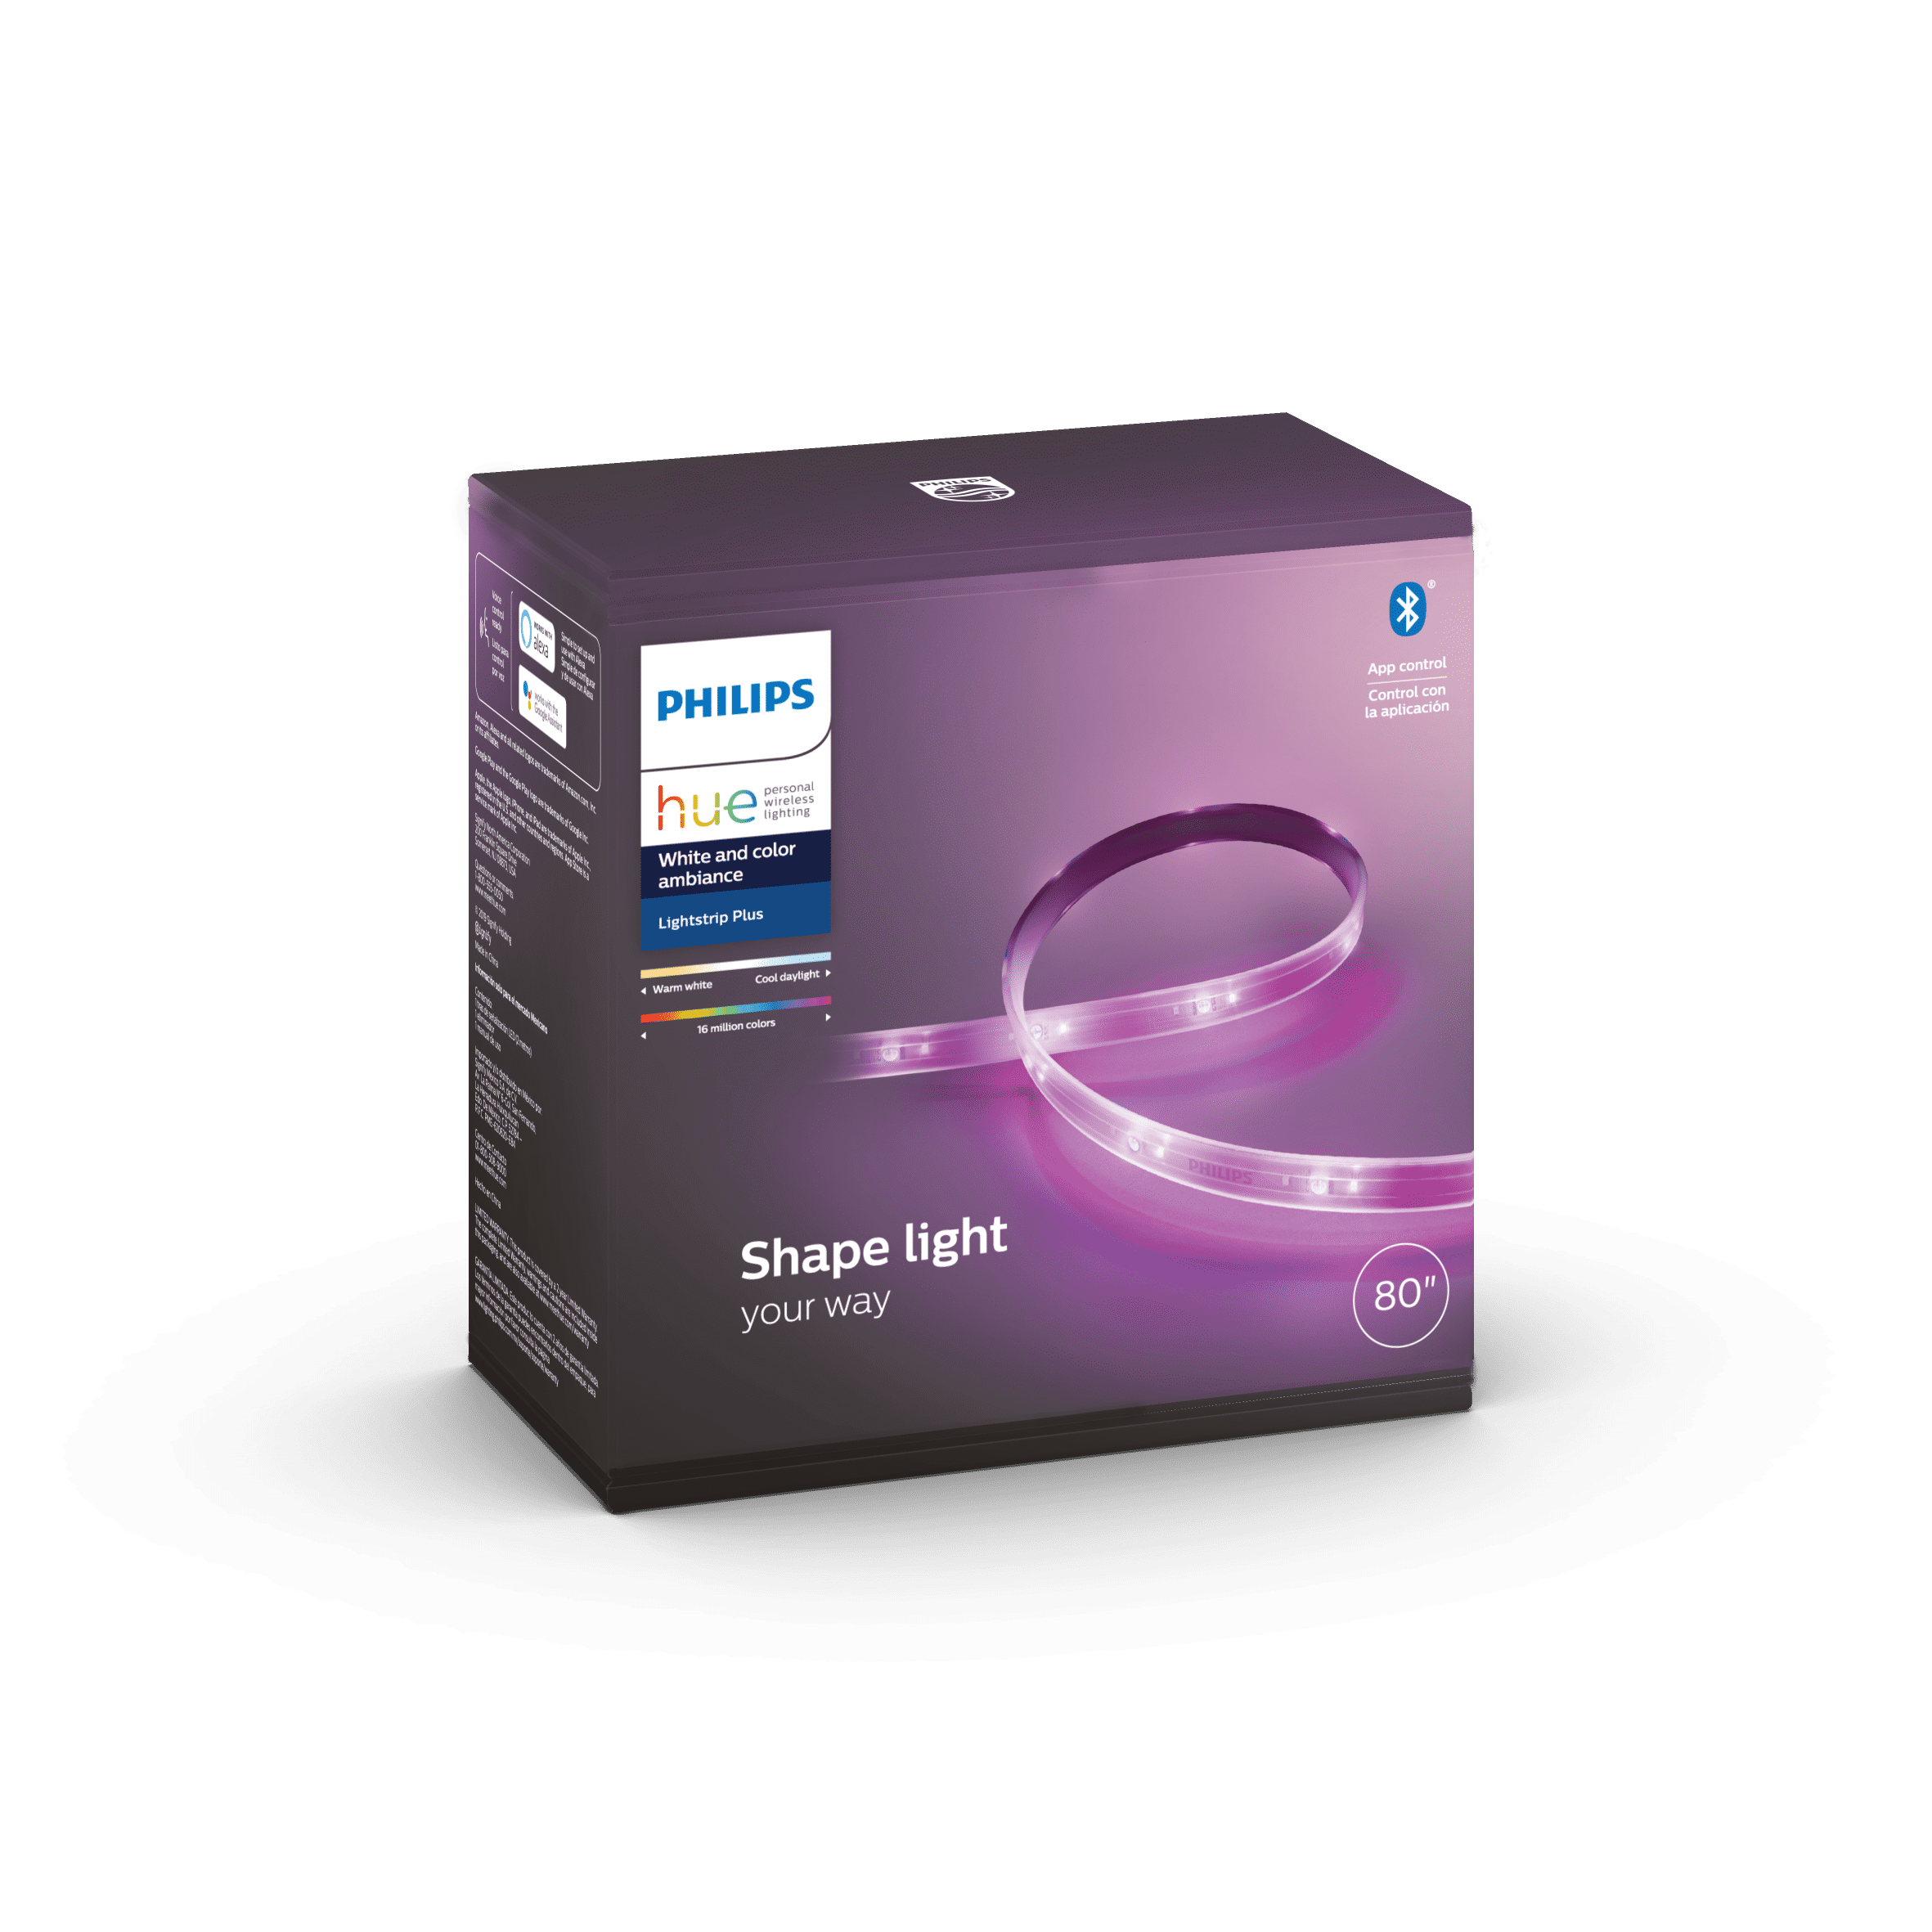 Philips Hue White and Color Ambiance Lightstrip Plus feet Base Kit Bluetooth, White -